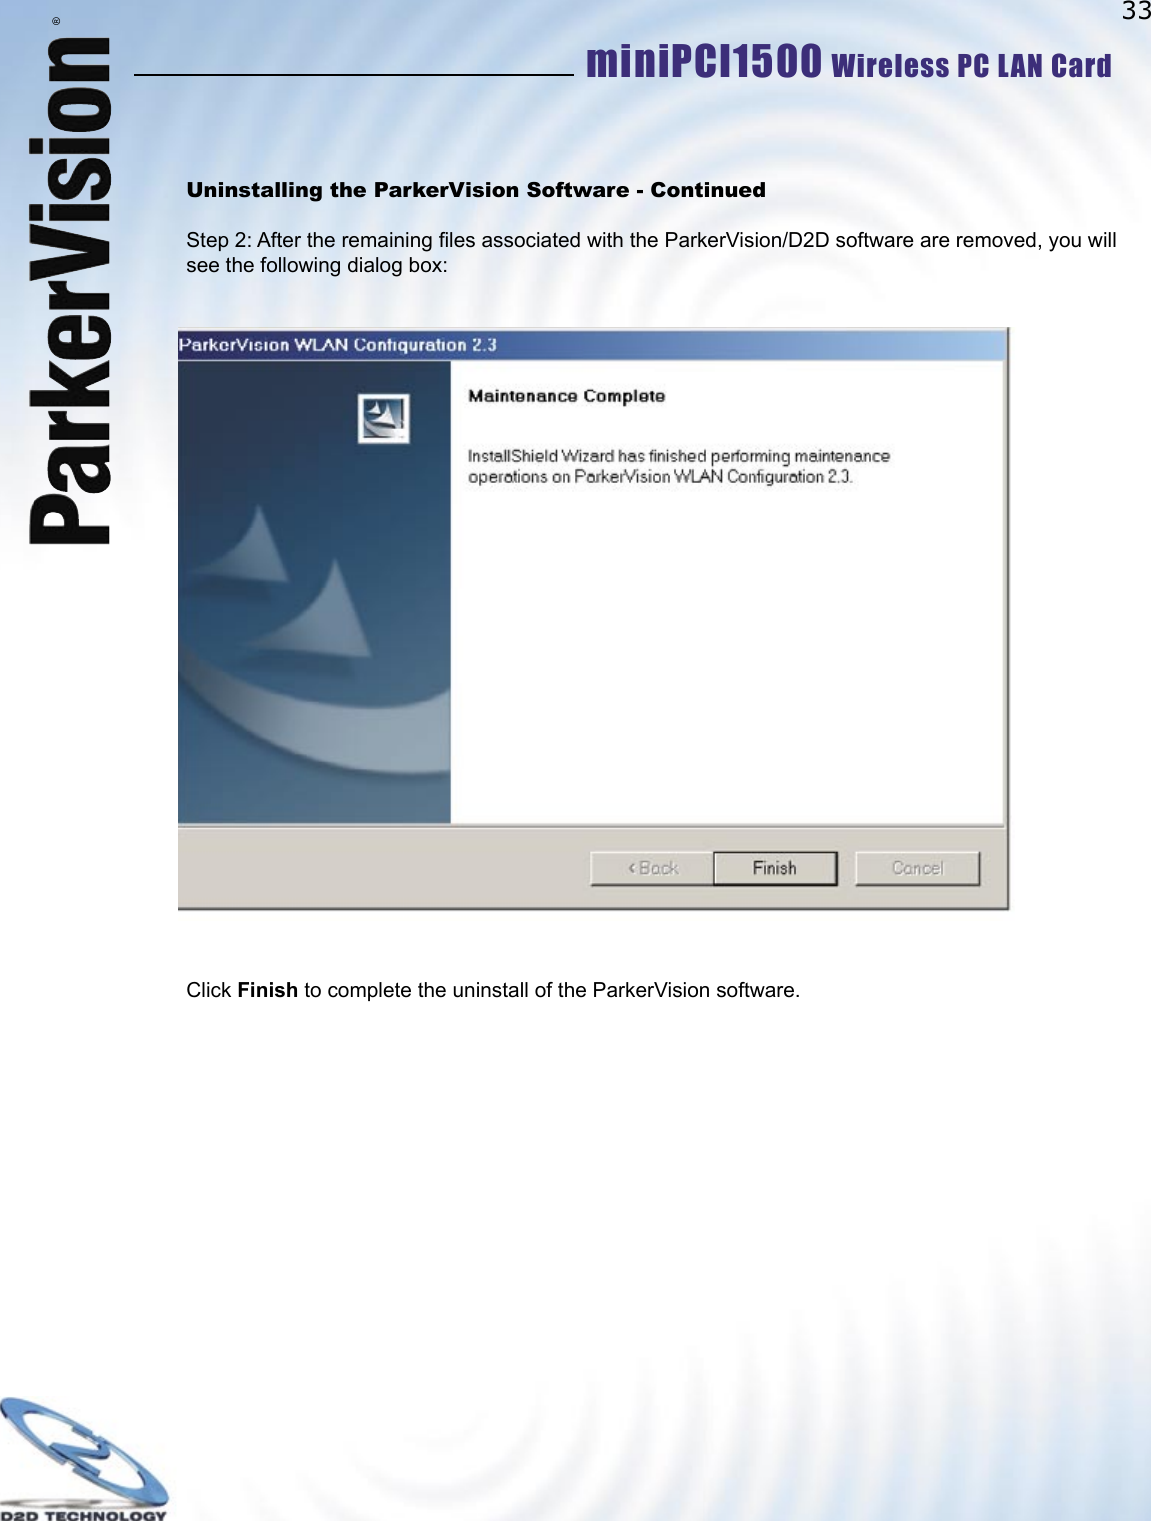 33miniPCI1500 Wireless PC LAN Card ®Uninstalling the ParkerVision Software - ContinuedStep 2: After the remaining ﬁ les associated with the ParkerVision/D2D software are removed, you will see the following dialog box:Click Finish to complete the uninstall of the ParkerVision software.